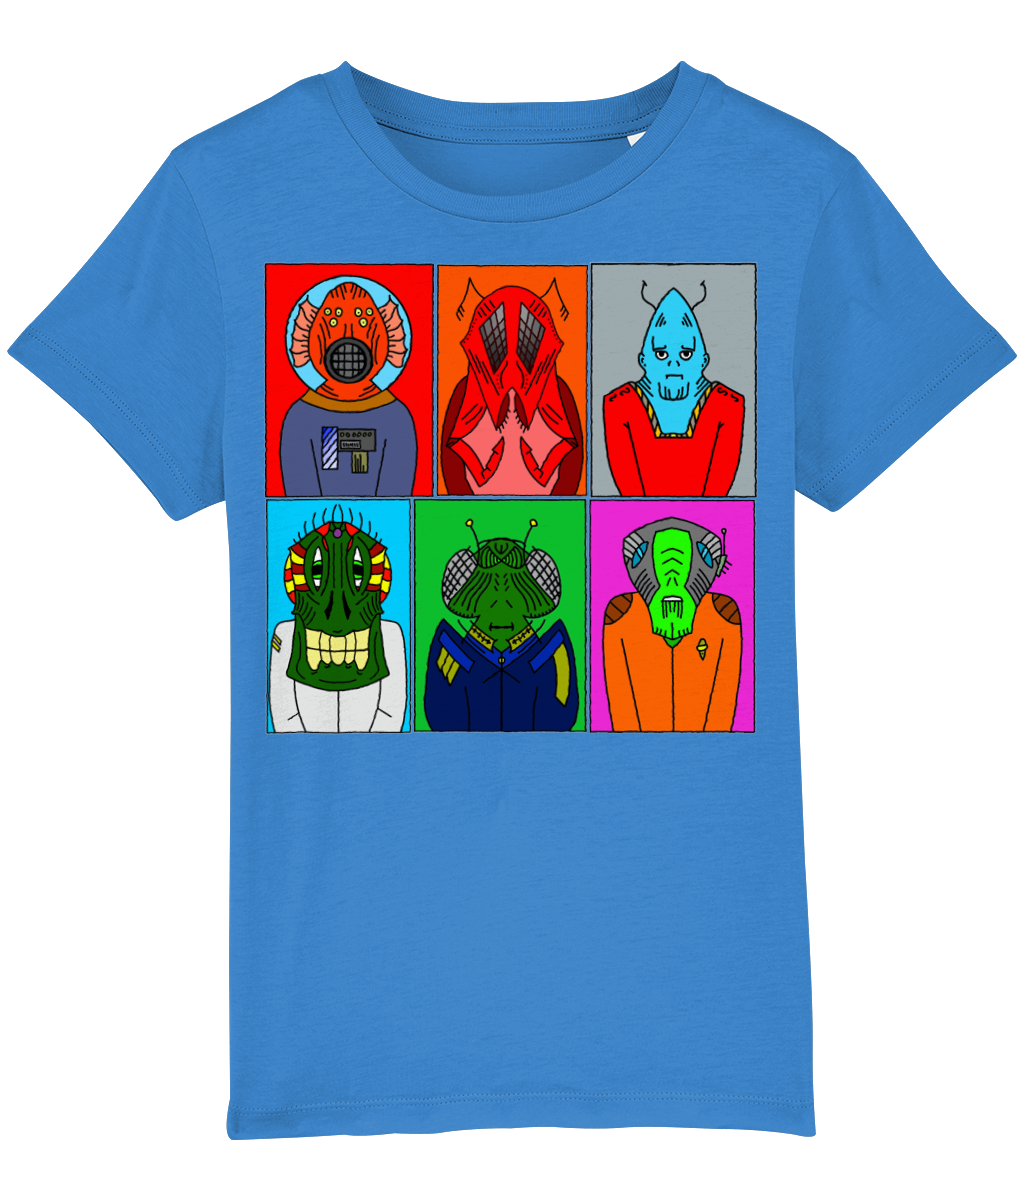 Kids Rogues Gallery T-Shirt